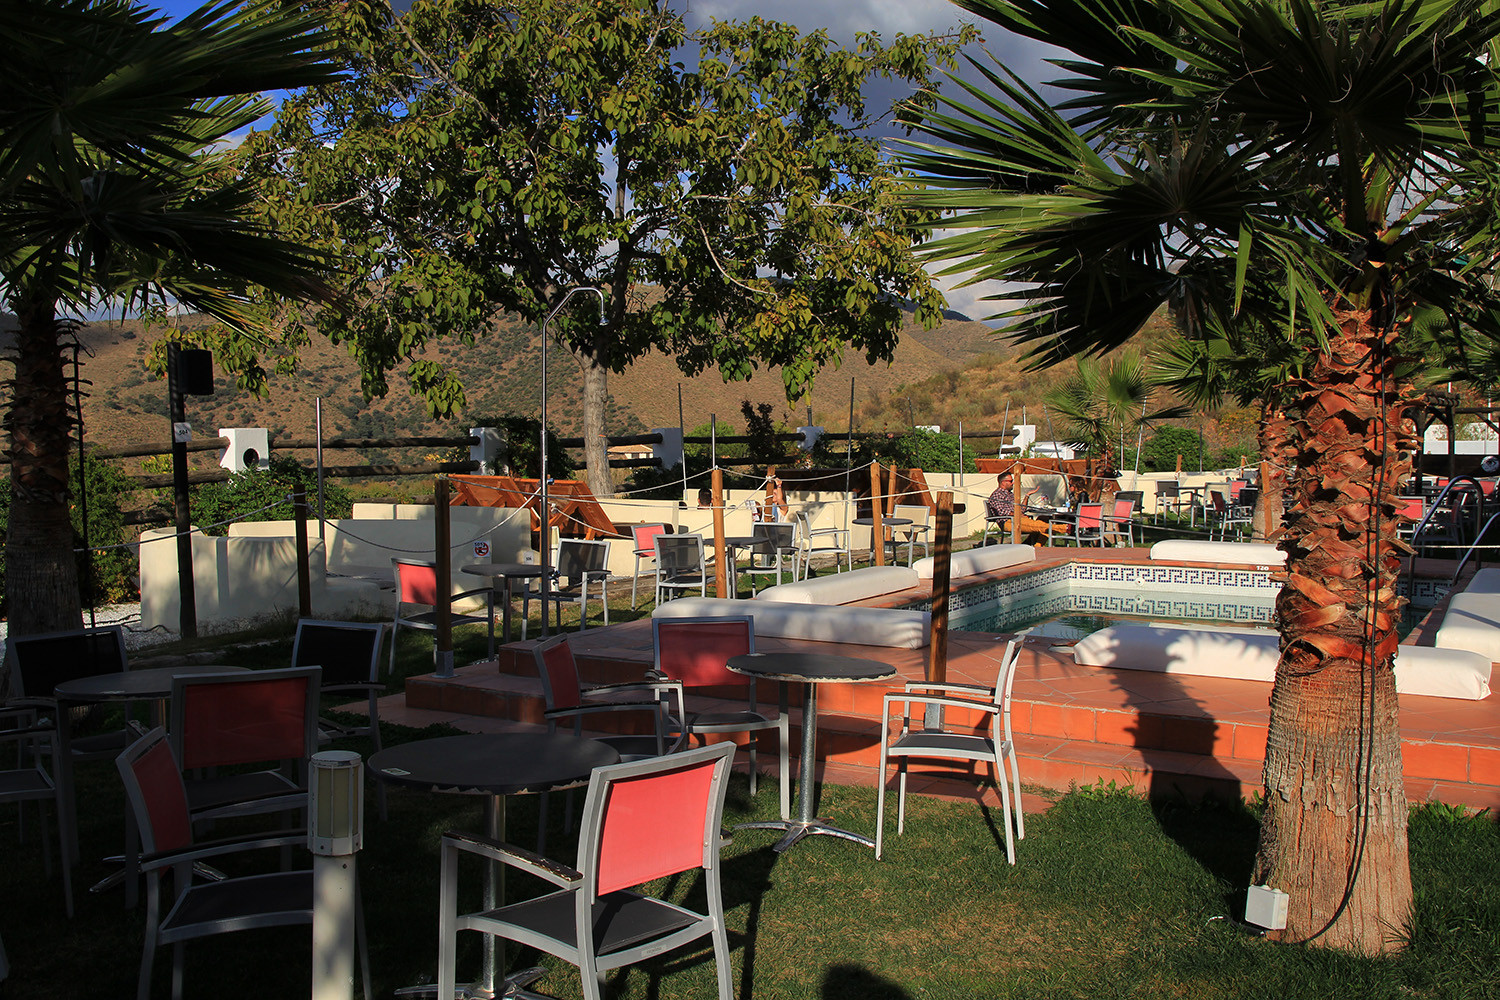 The terrace of the restaurant